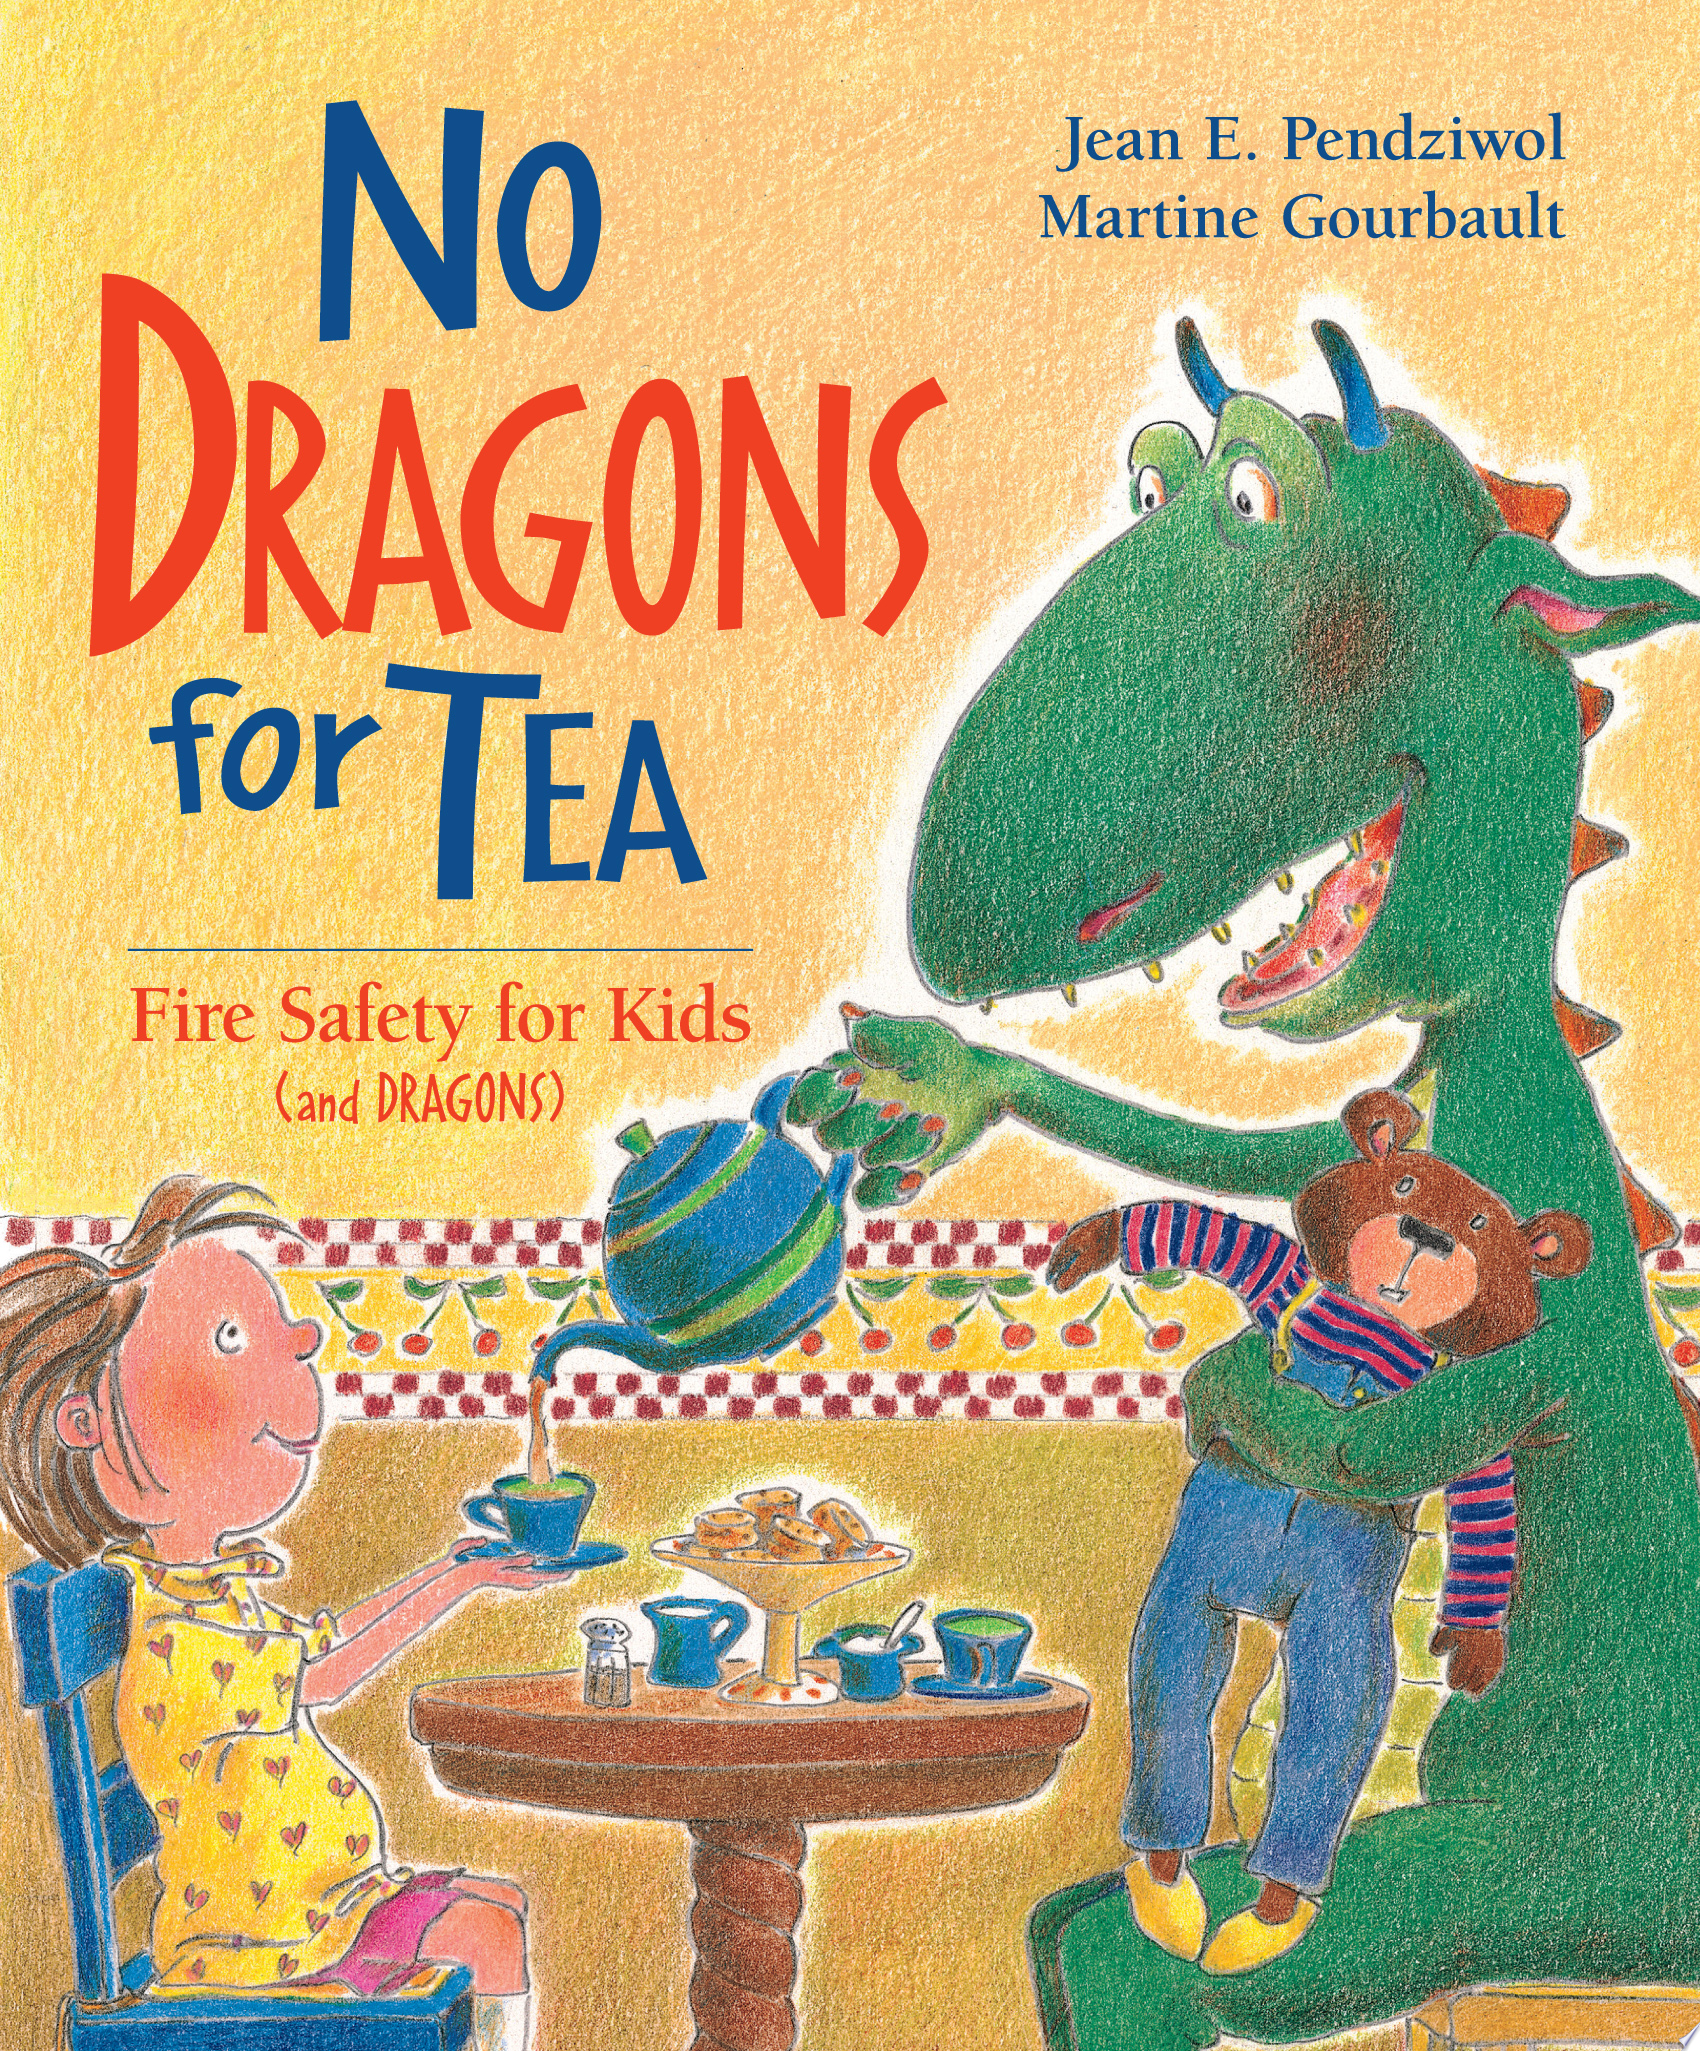 Image for "No Dragons for Tea"